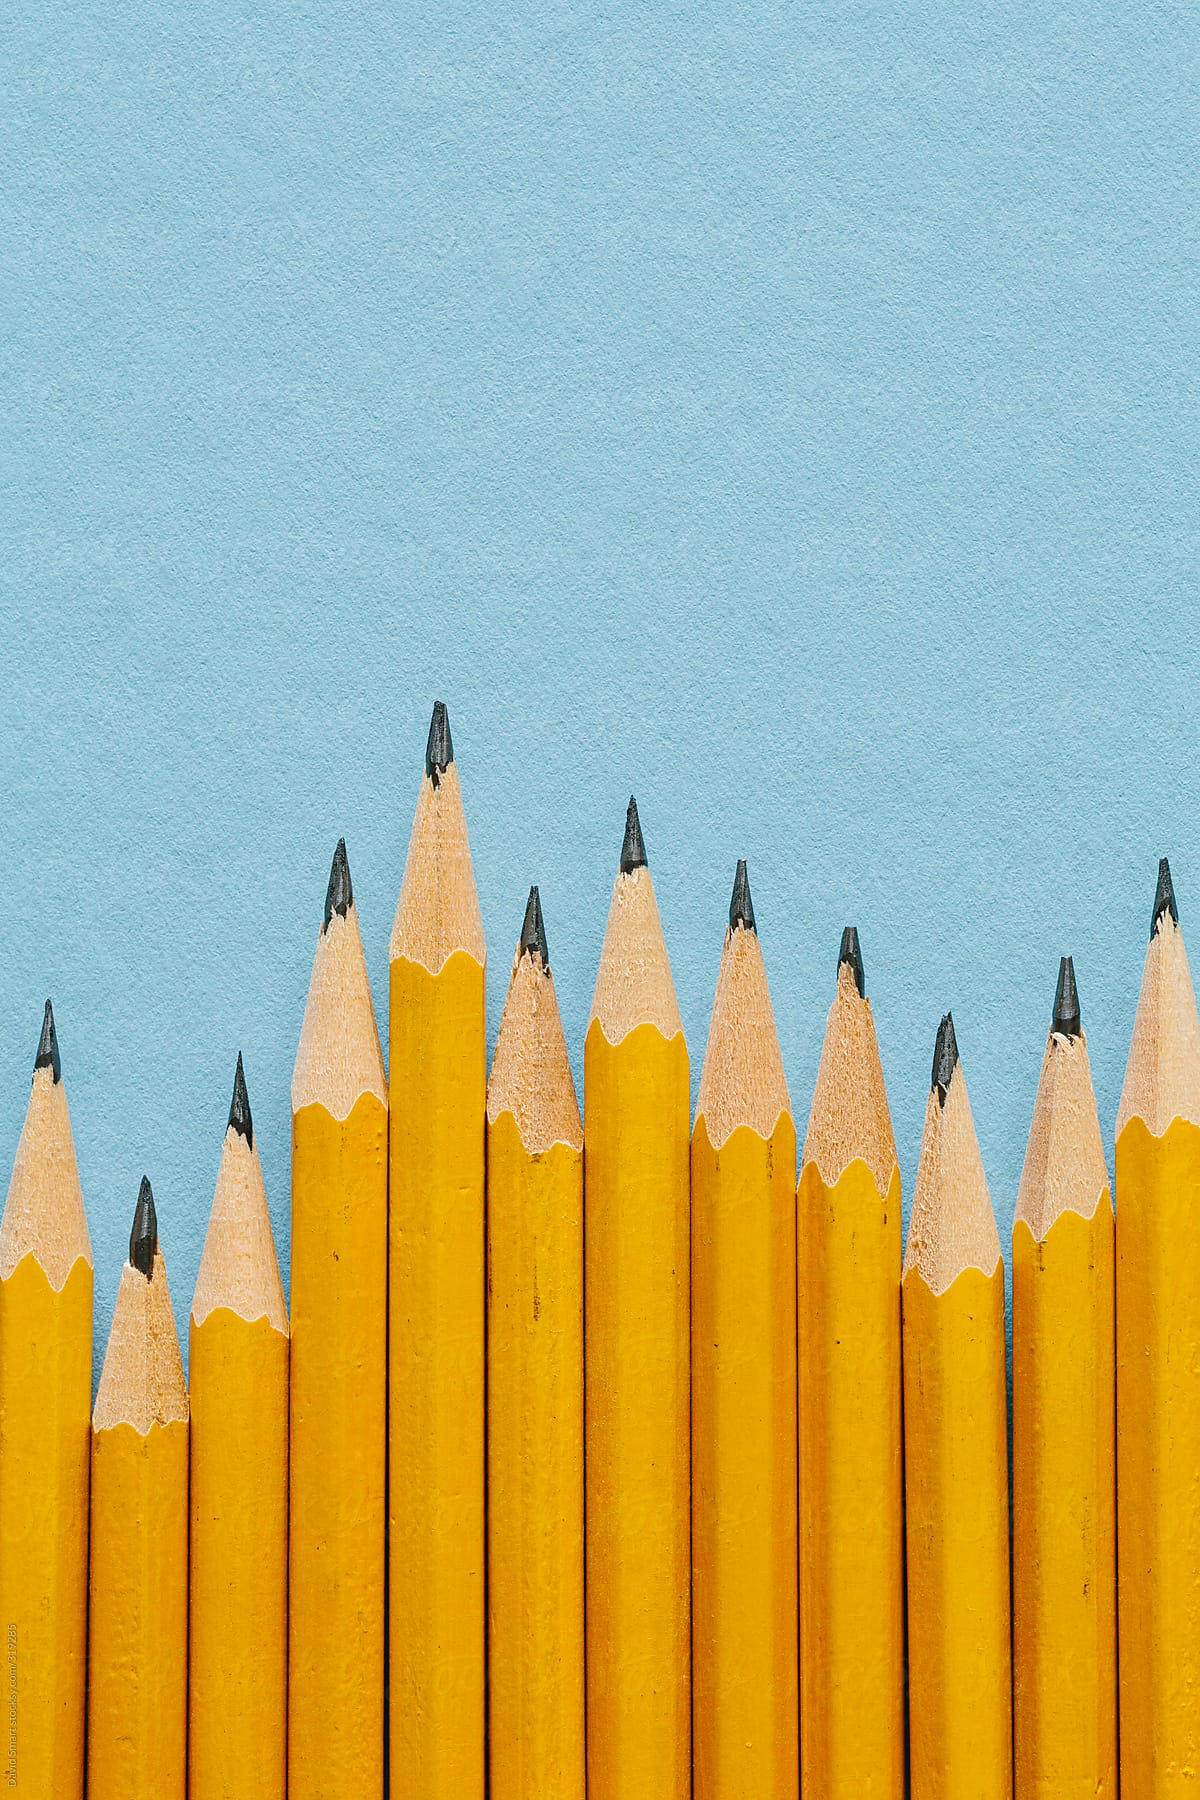 Yellow pencils used to represent bars in a graph